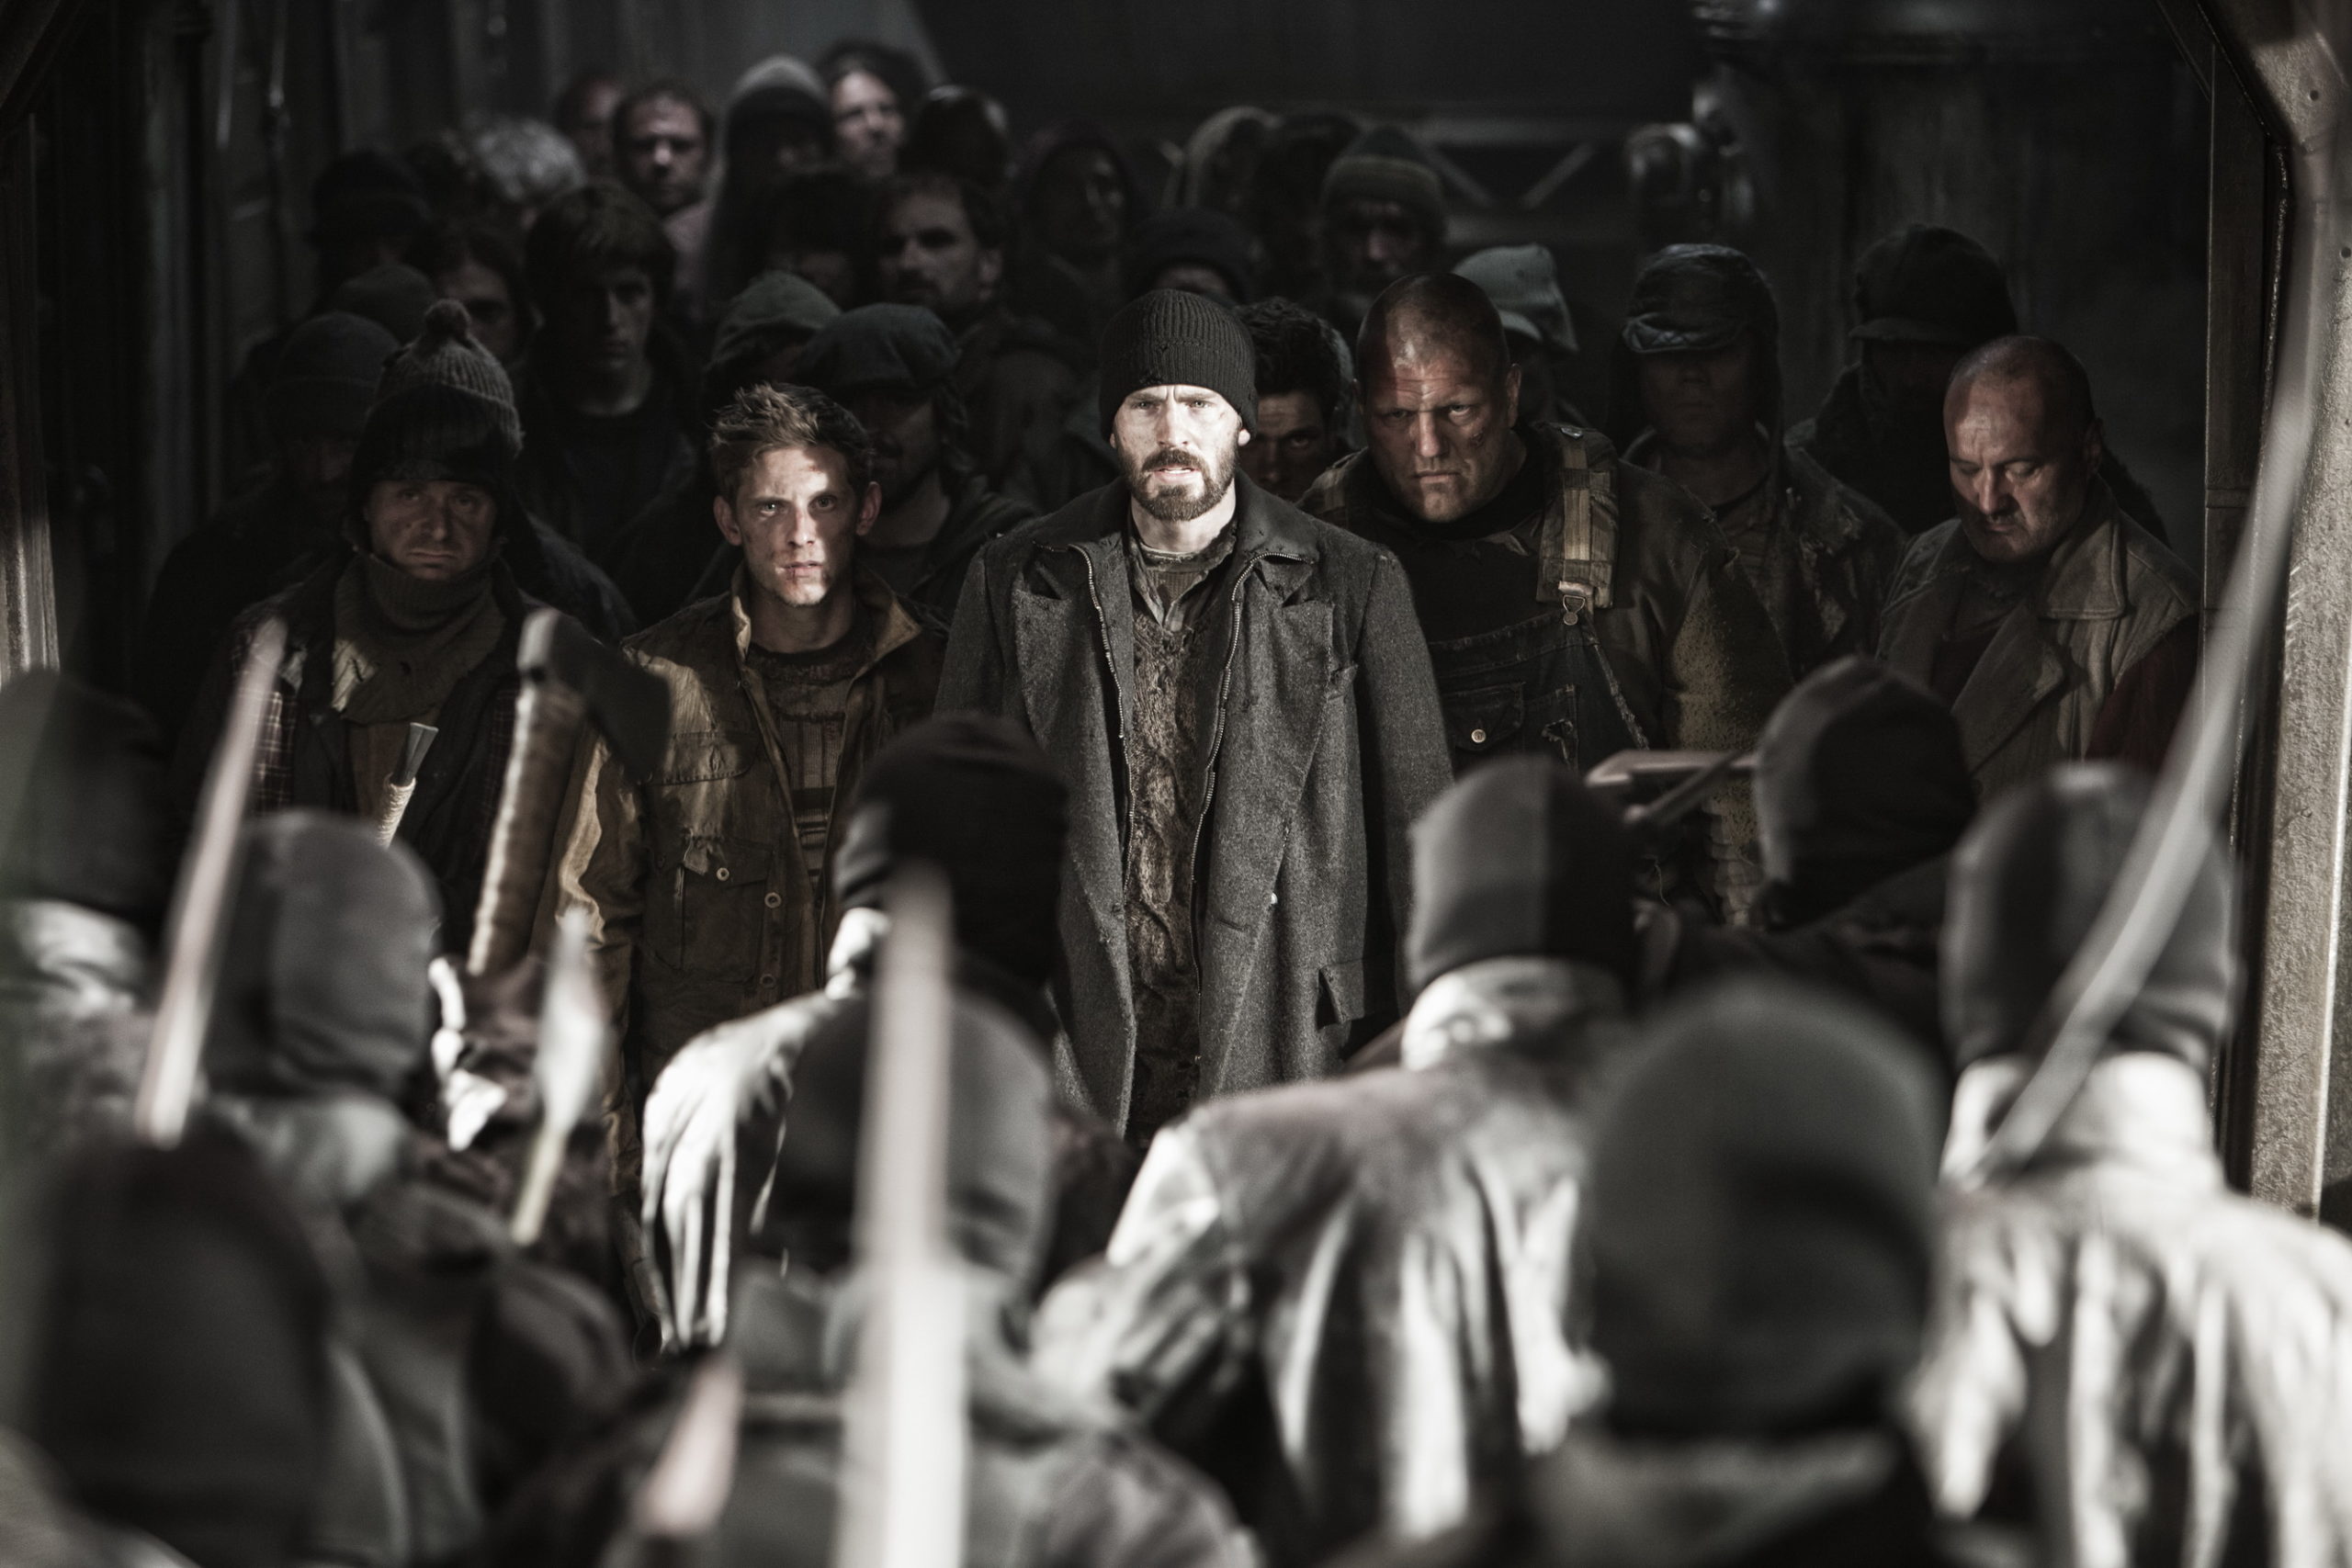 Snowpiercer Is One Of The Best Sci-Fi Movies In Years